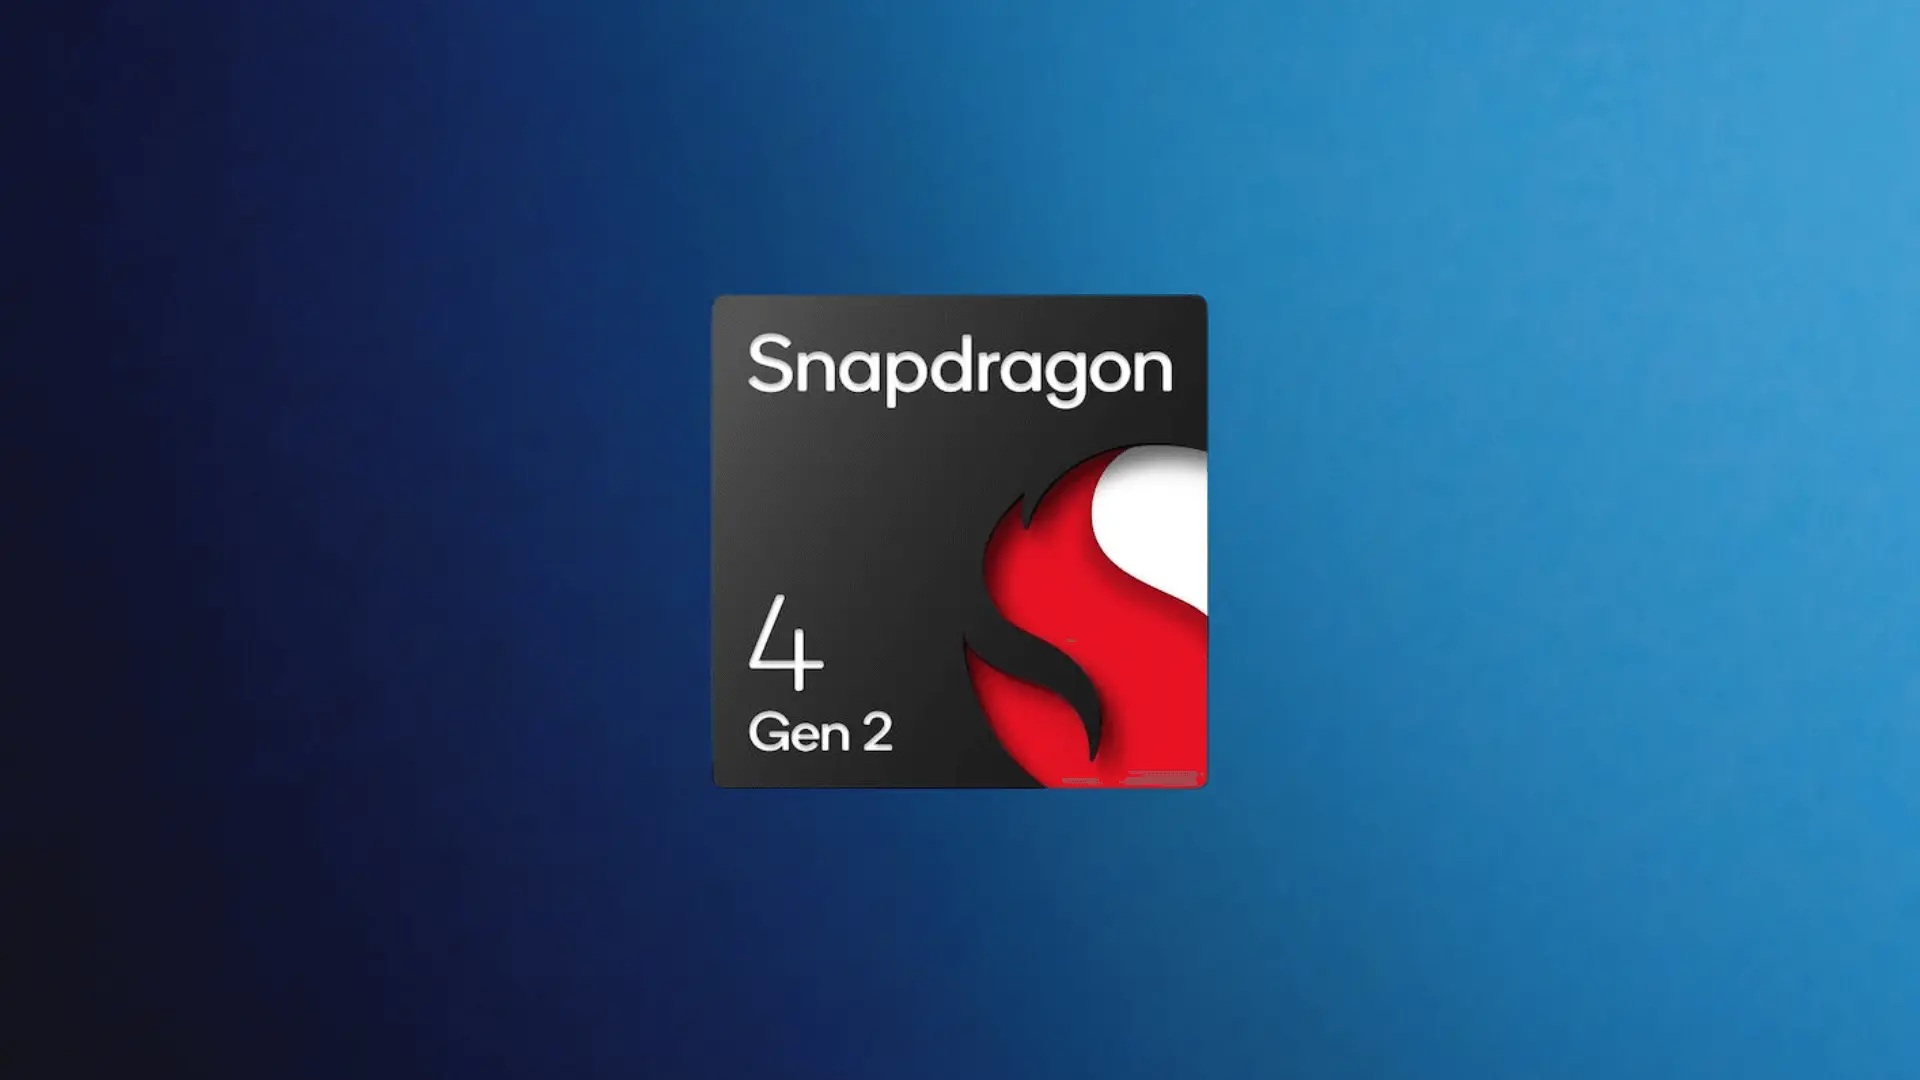 Snapdragon 4 Gen 2 Unveiled: 4 nm Chip With Faster RAM and Storage